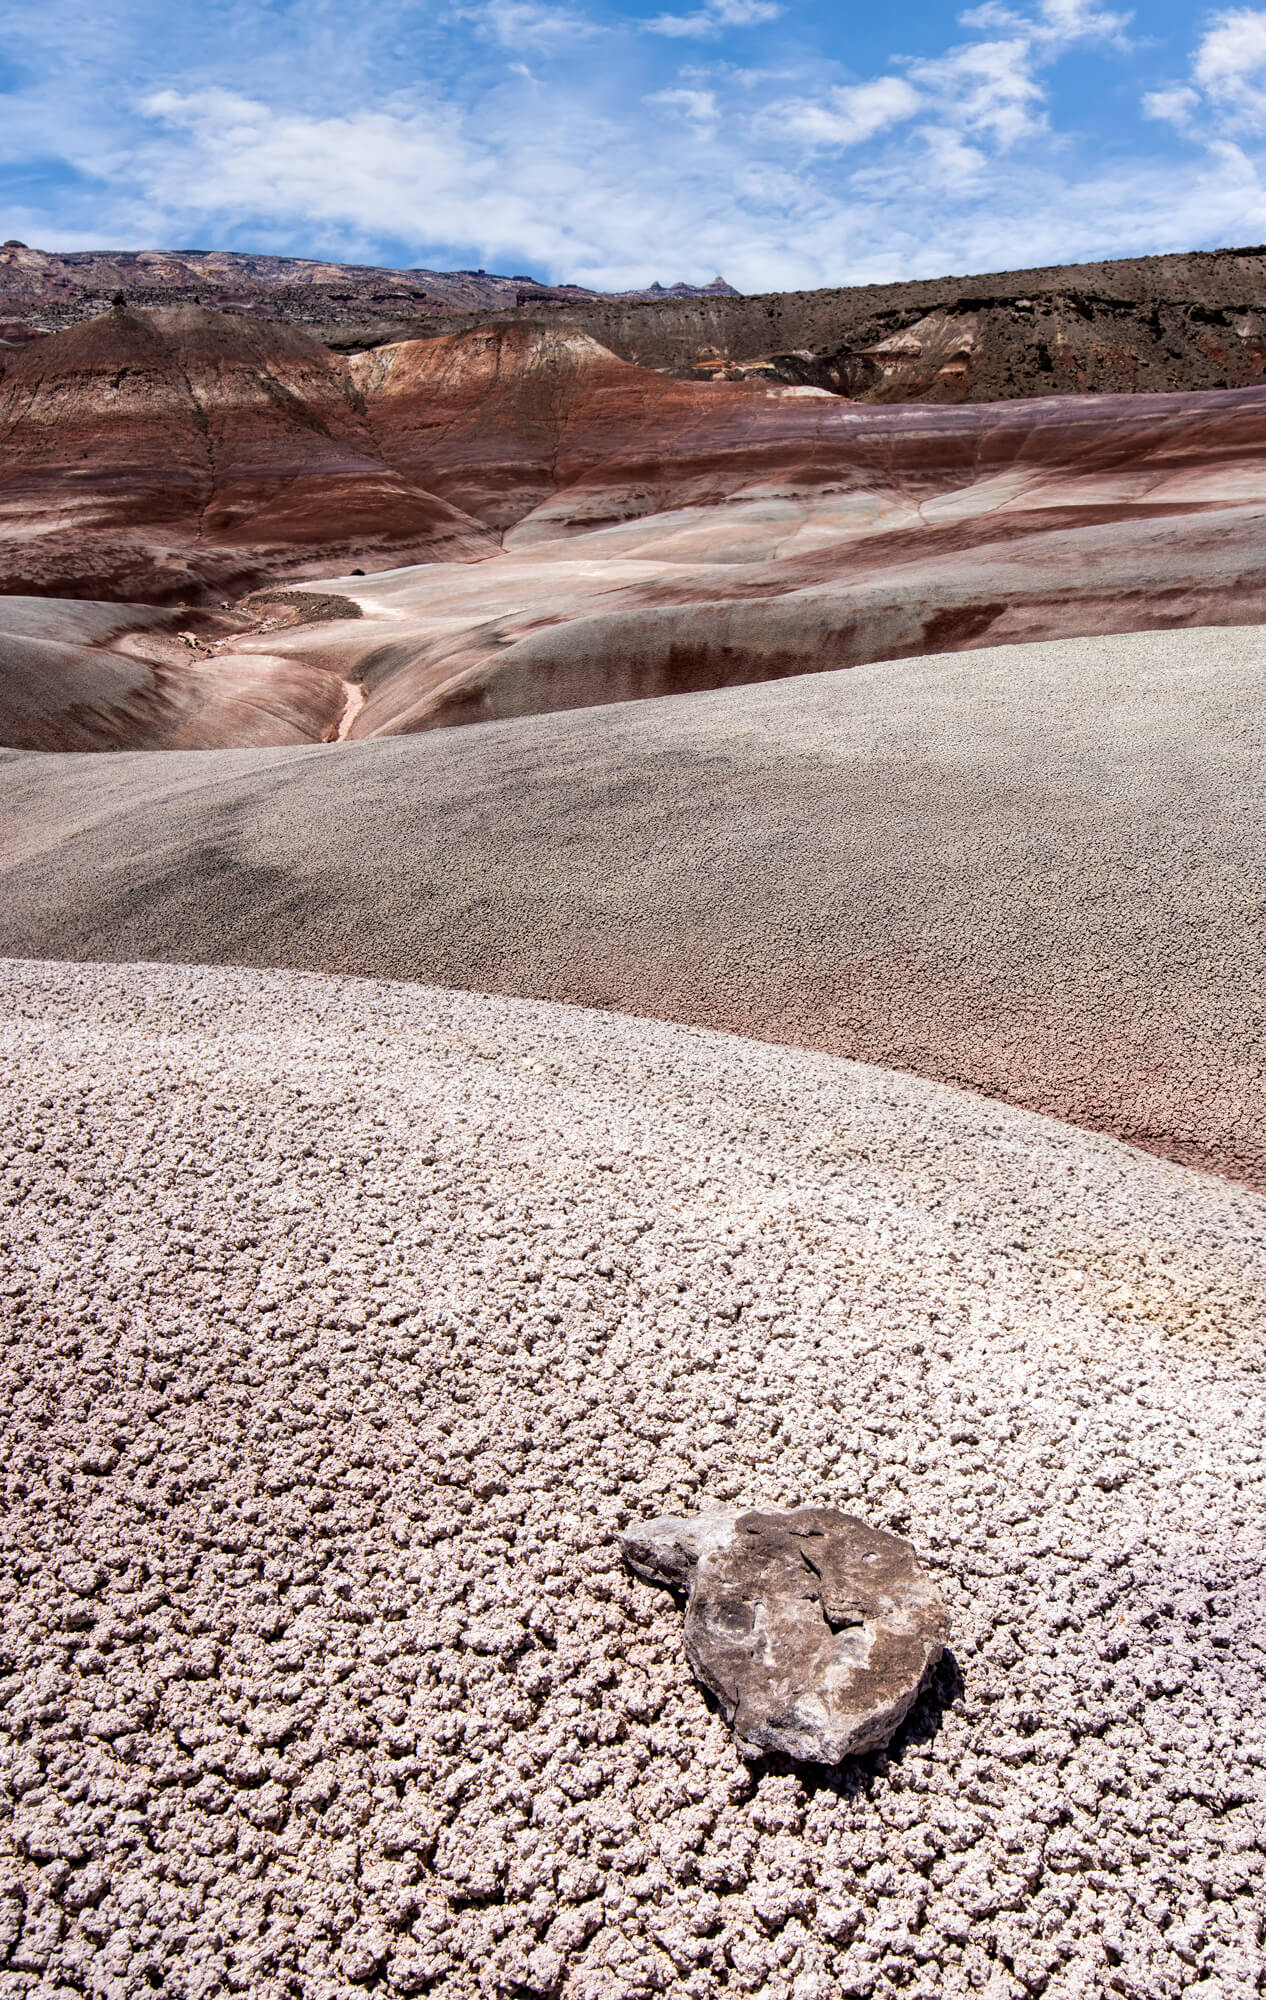 Capitol Reef Photography